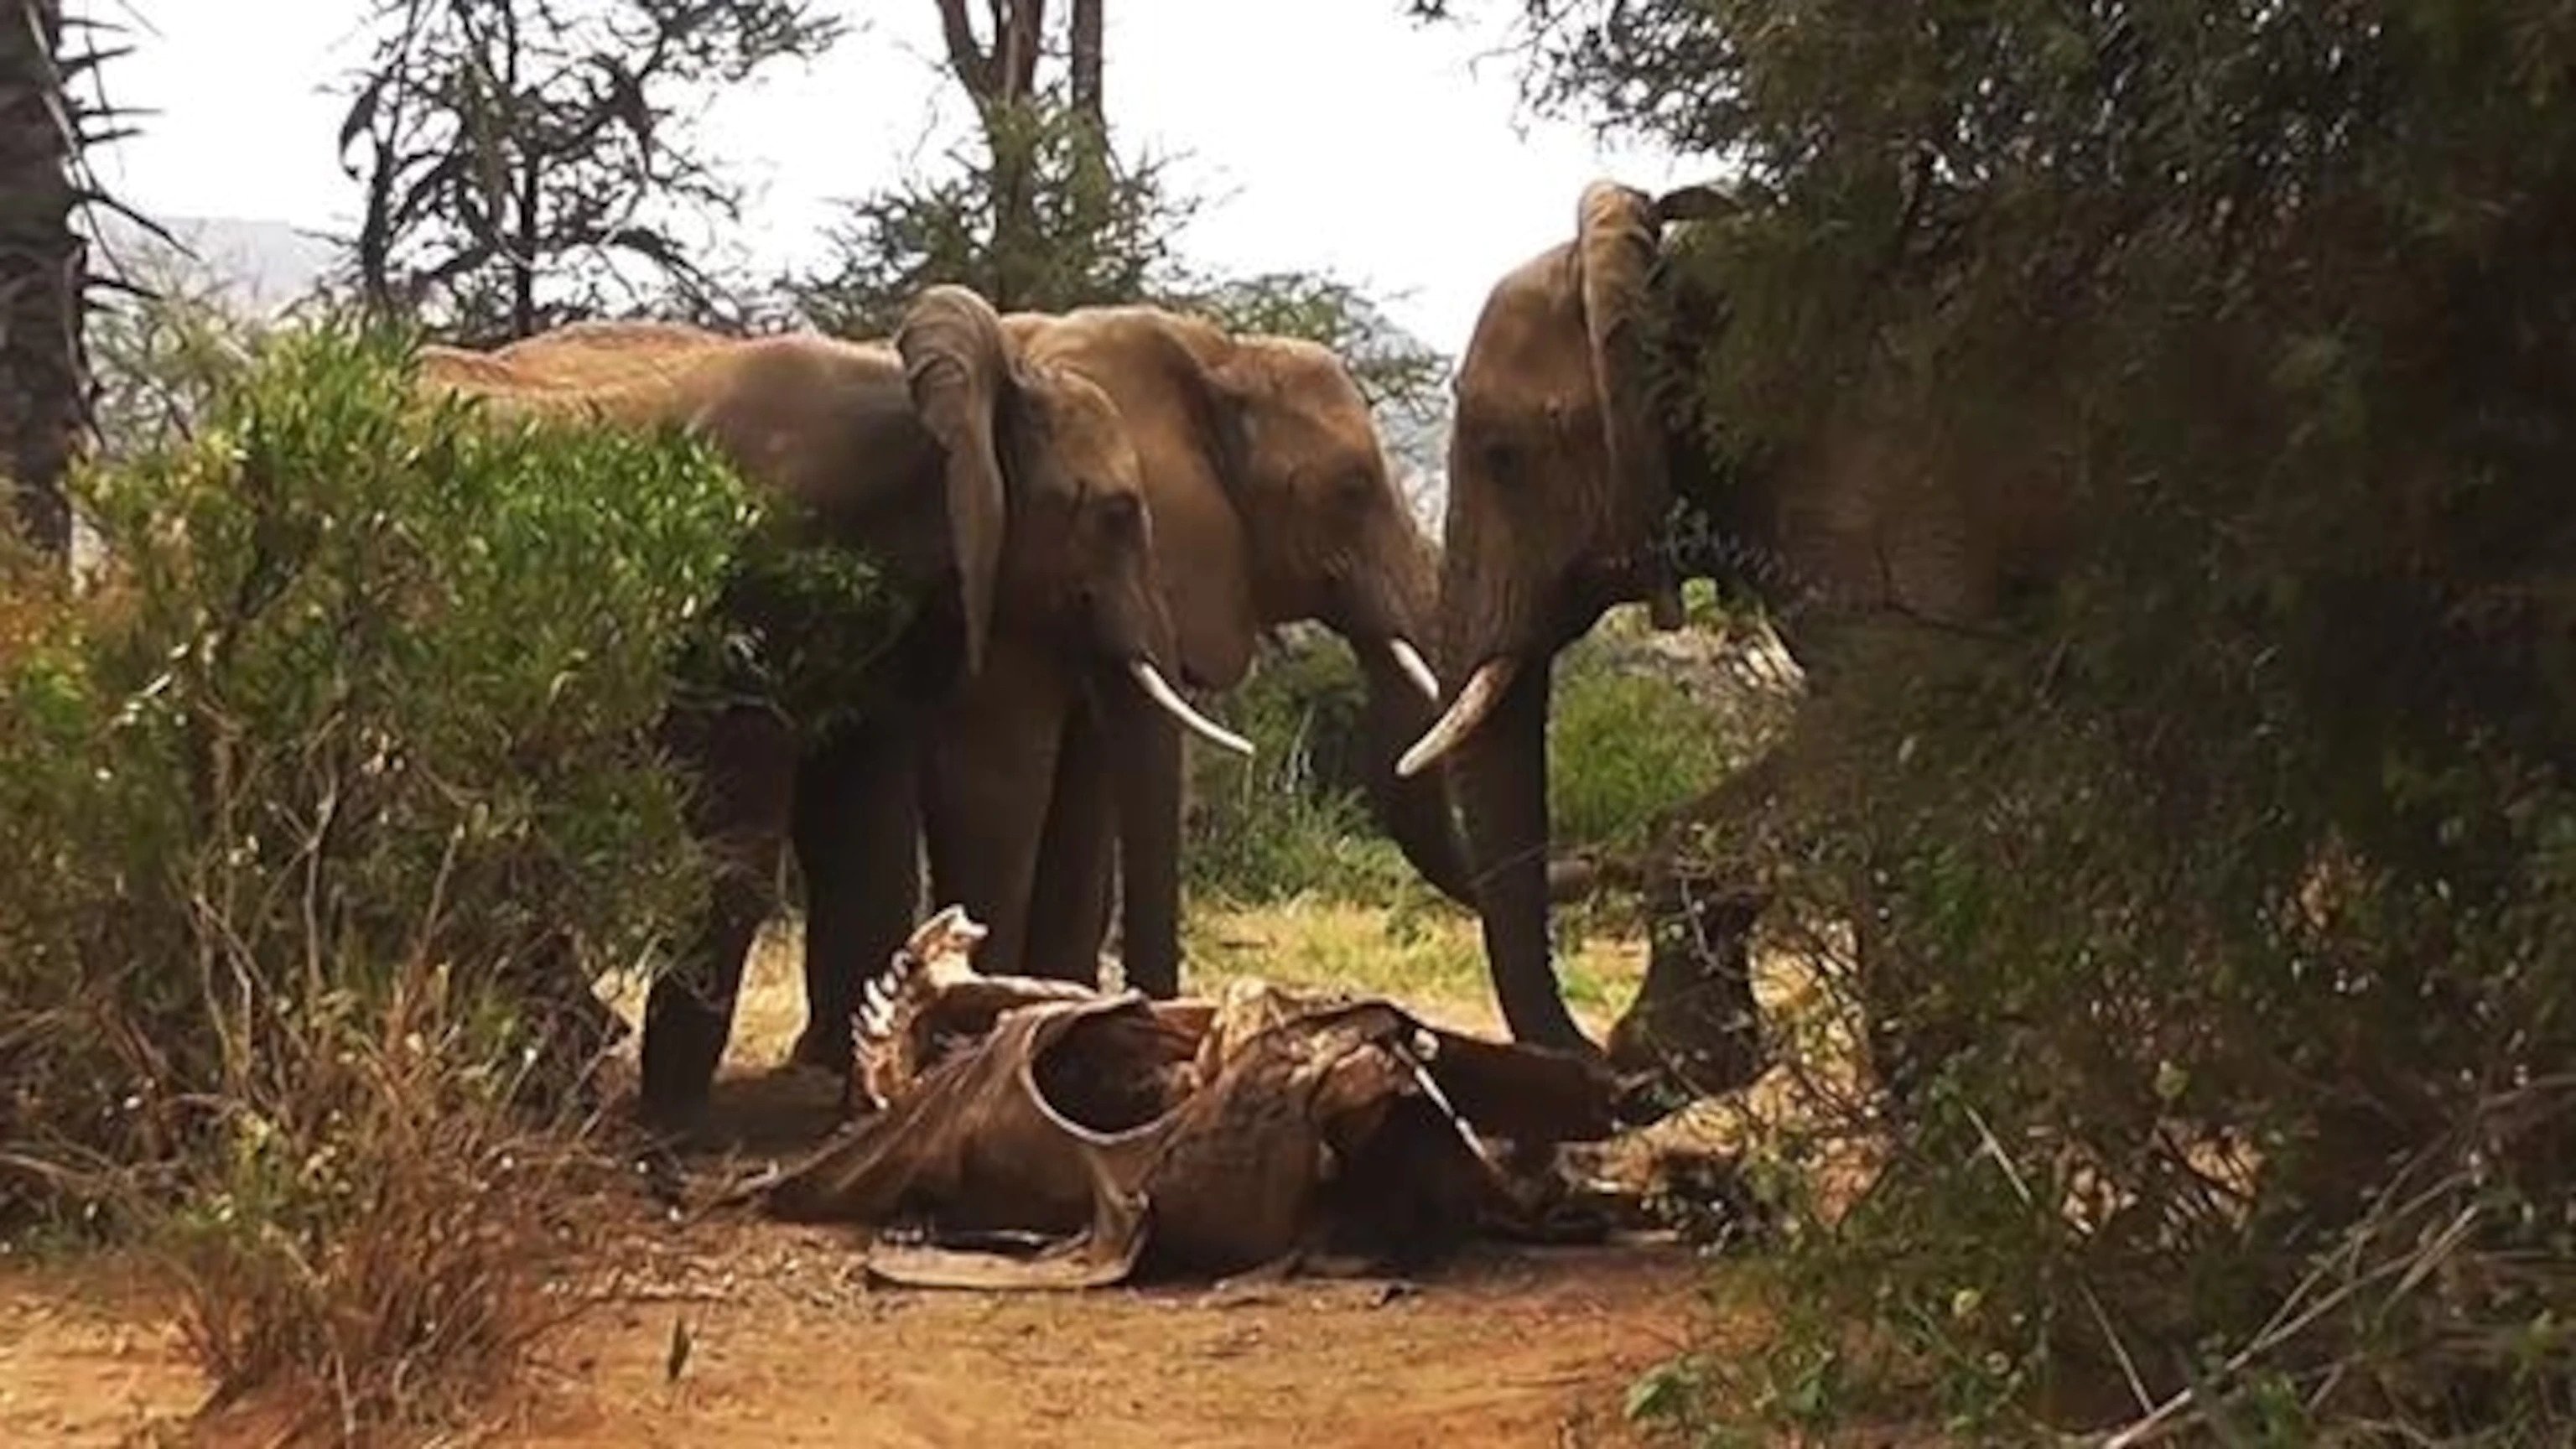 Elephants Mourn Their Dead Unlike Other Animals - Here Is Why